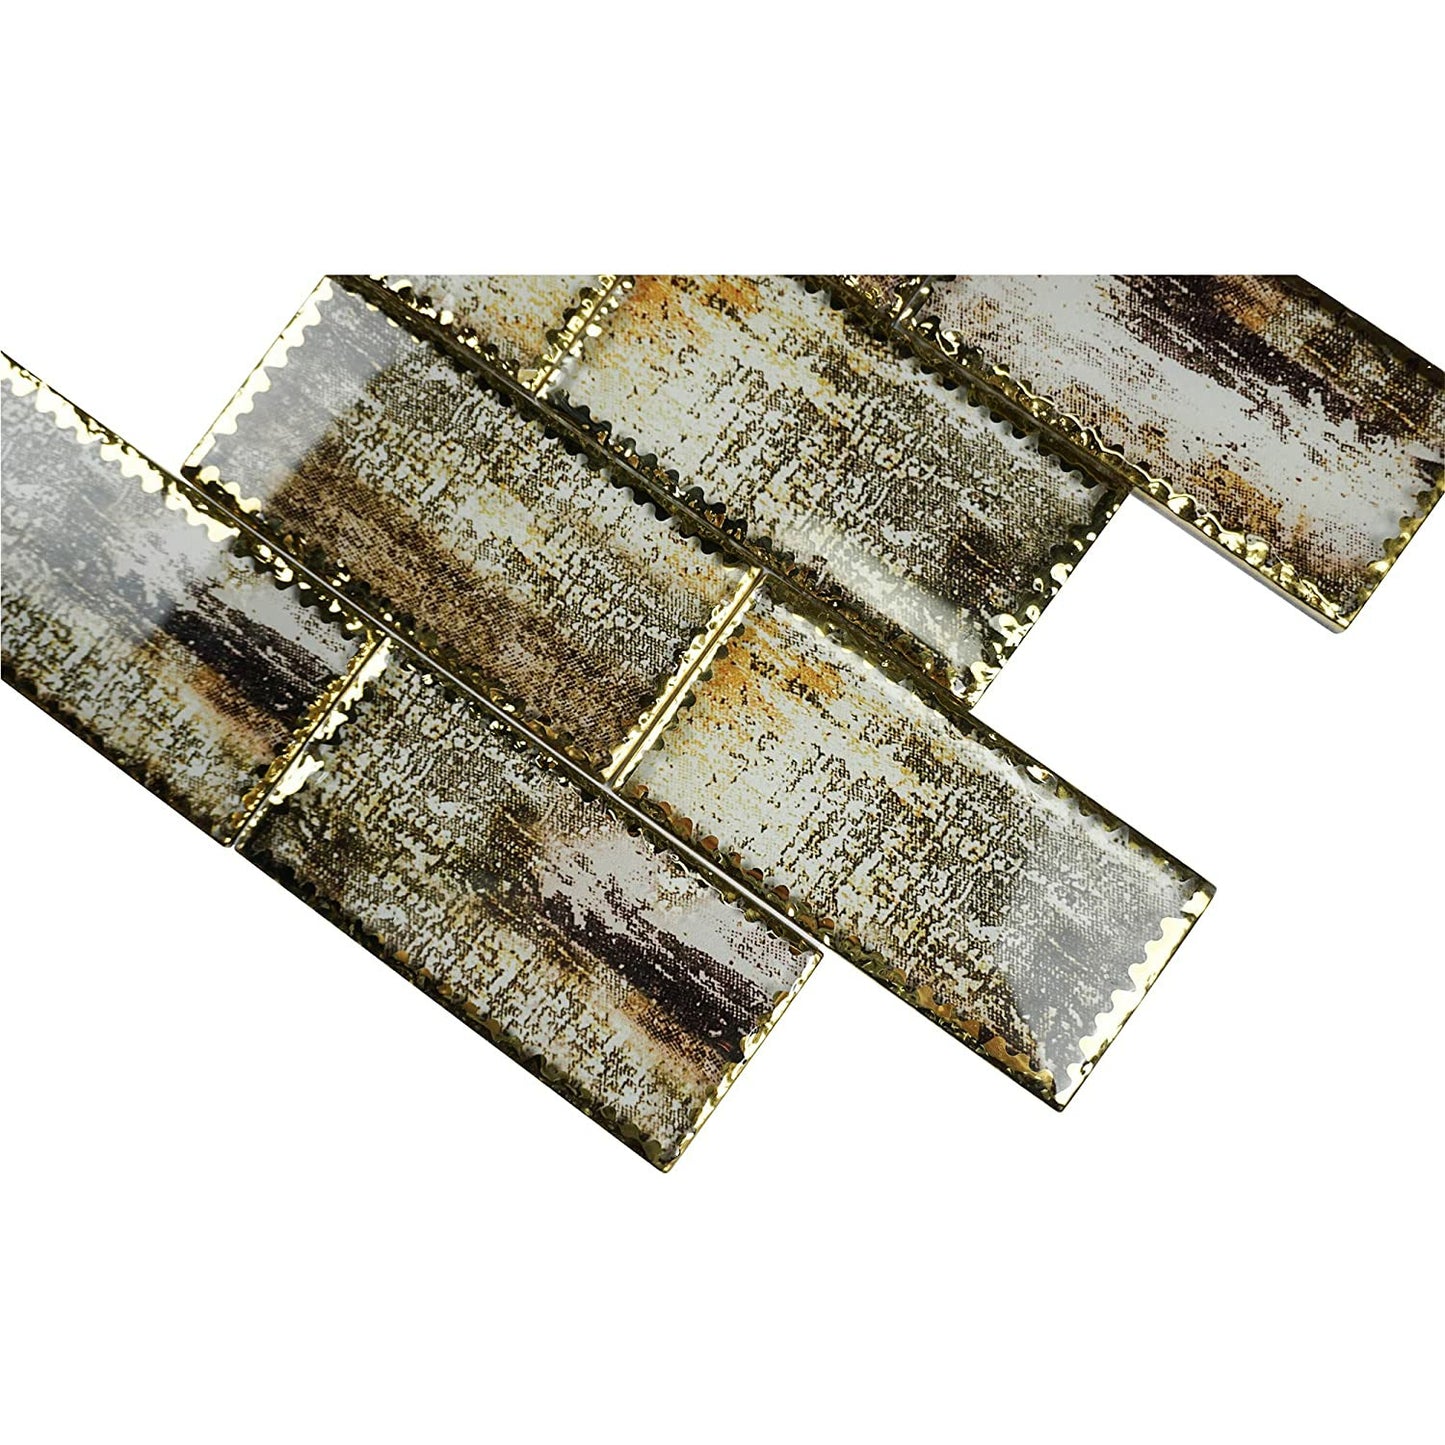 3'' x 6'' faded color subway tile 